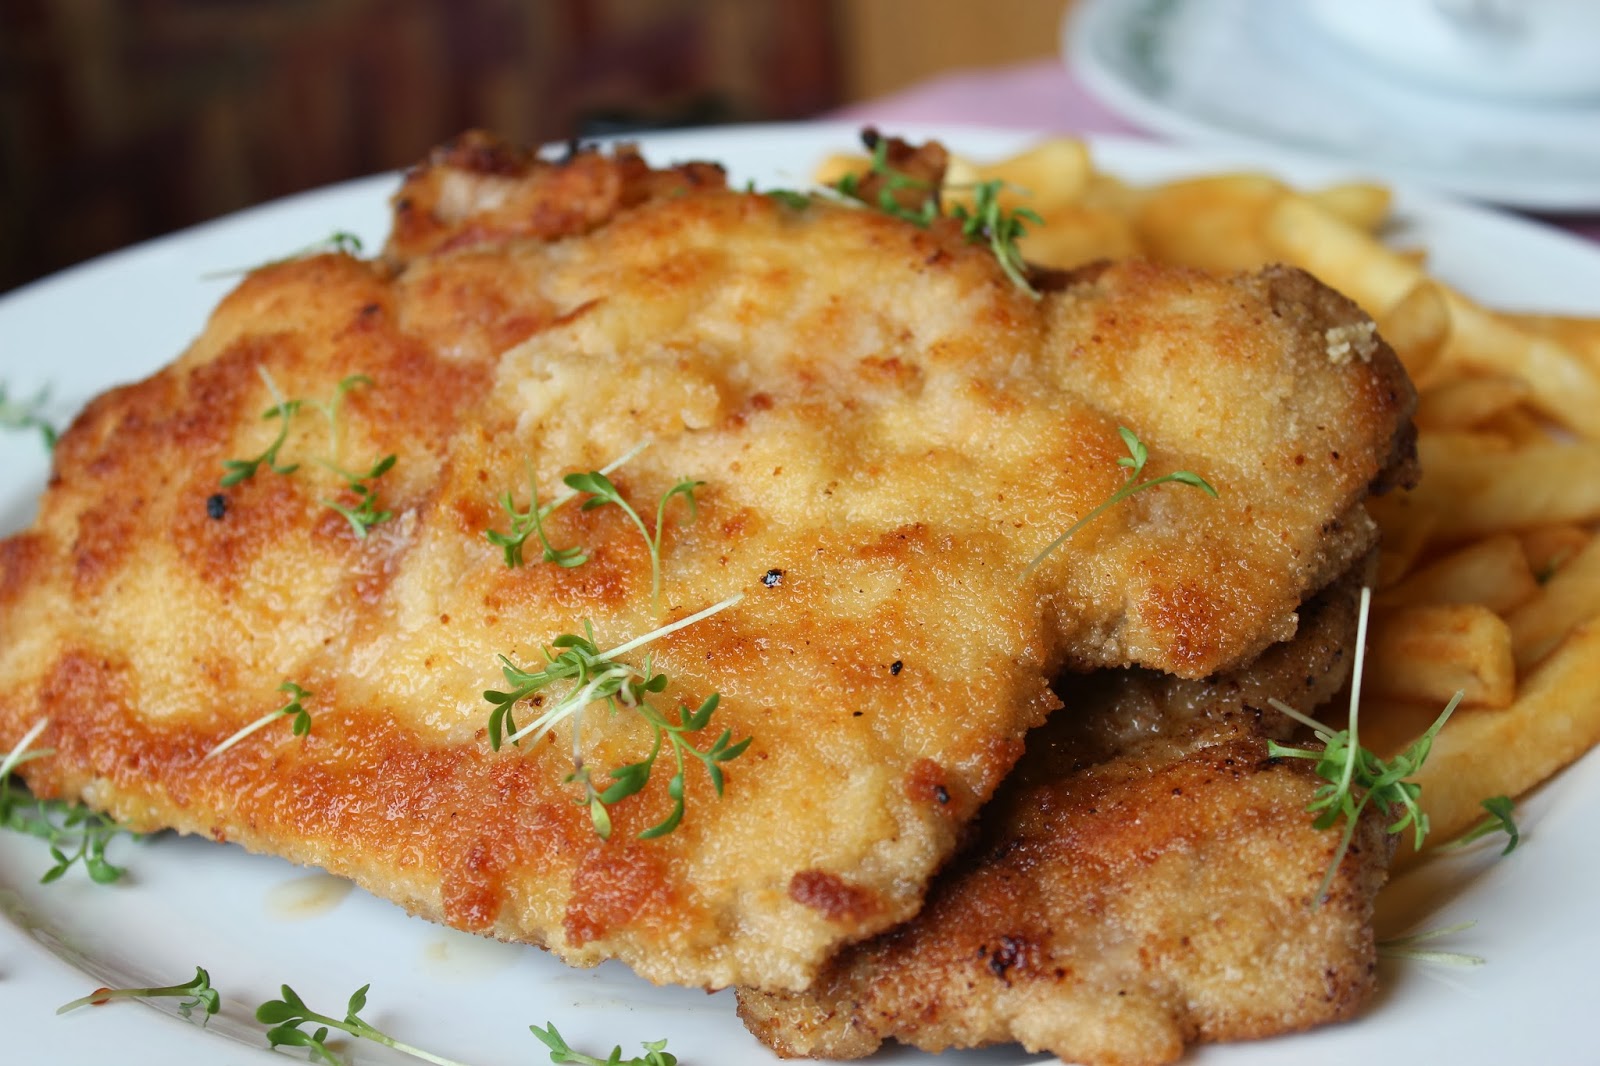 Delicious Dishings: Schnitzel And Spaetzle And Adventures In Germany